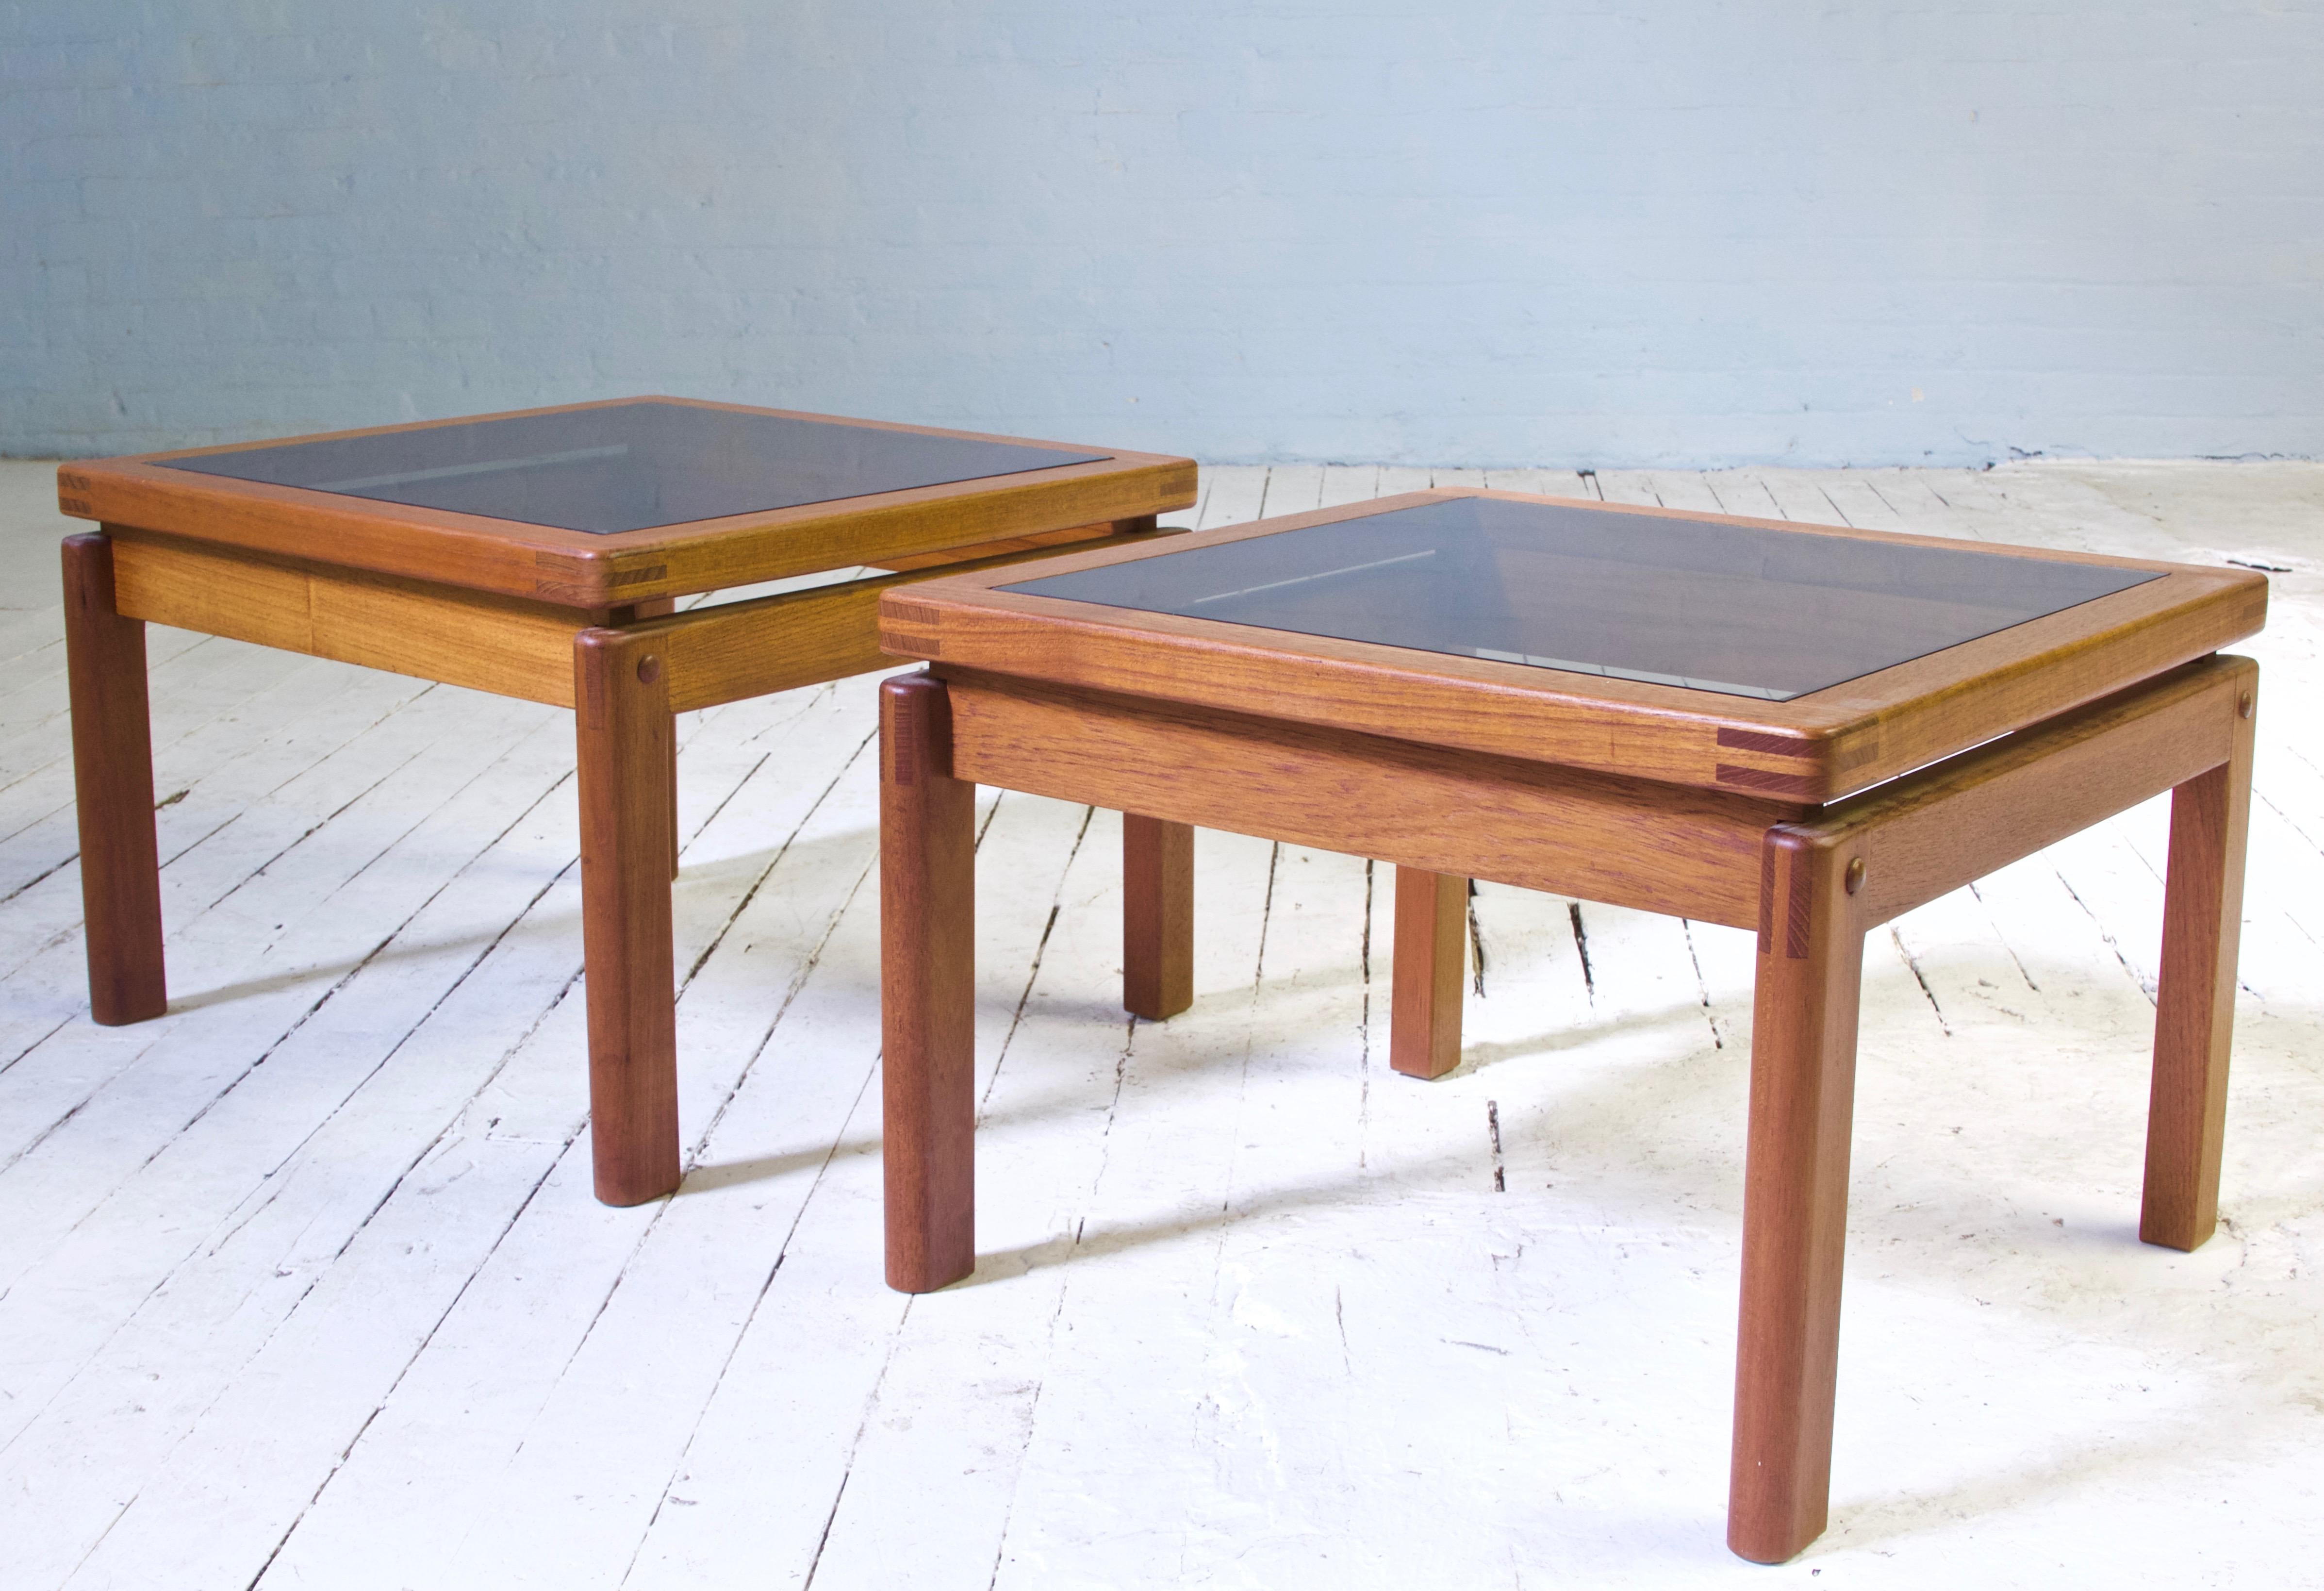 Vintage Pair of Signed Danish Side Tables with Exposed Joinery in Teak, 1960s For Sale 1